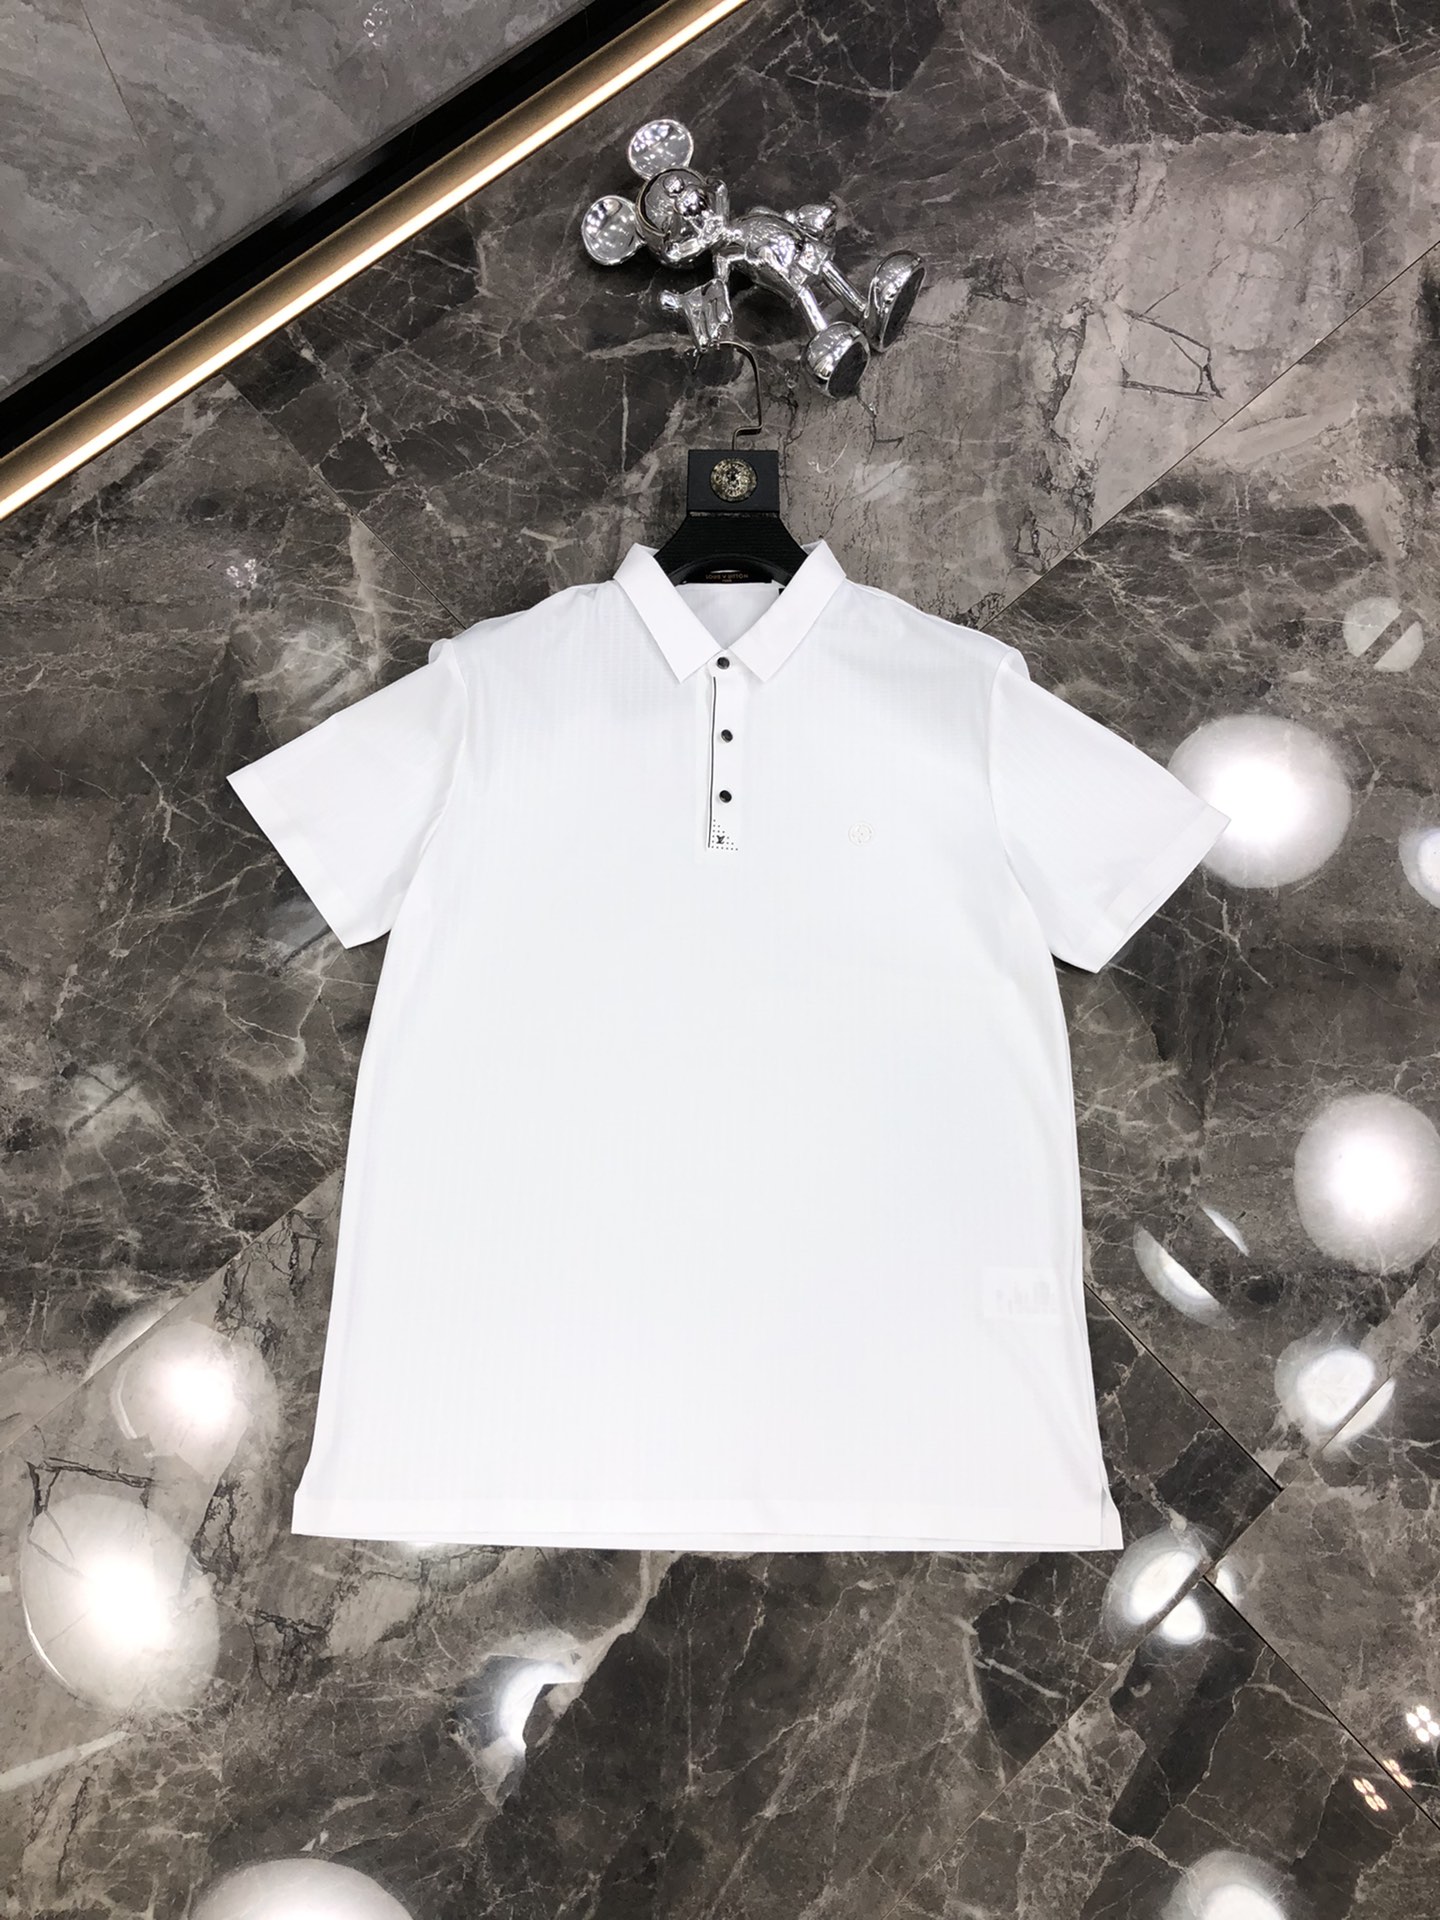 Louis Vuitton Clothing Polo T-Shirt White Summer Collection Short Sleeve